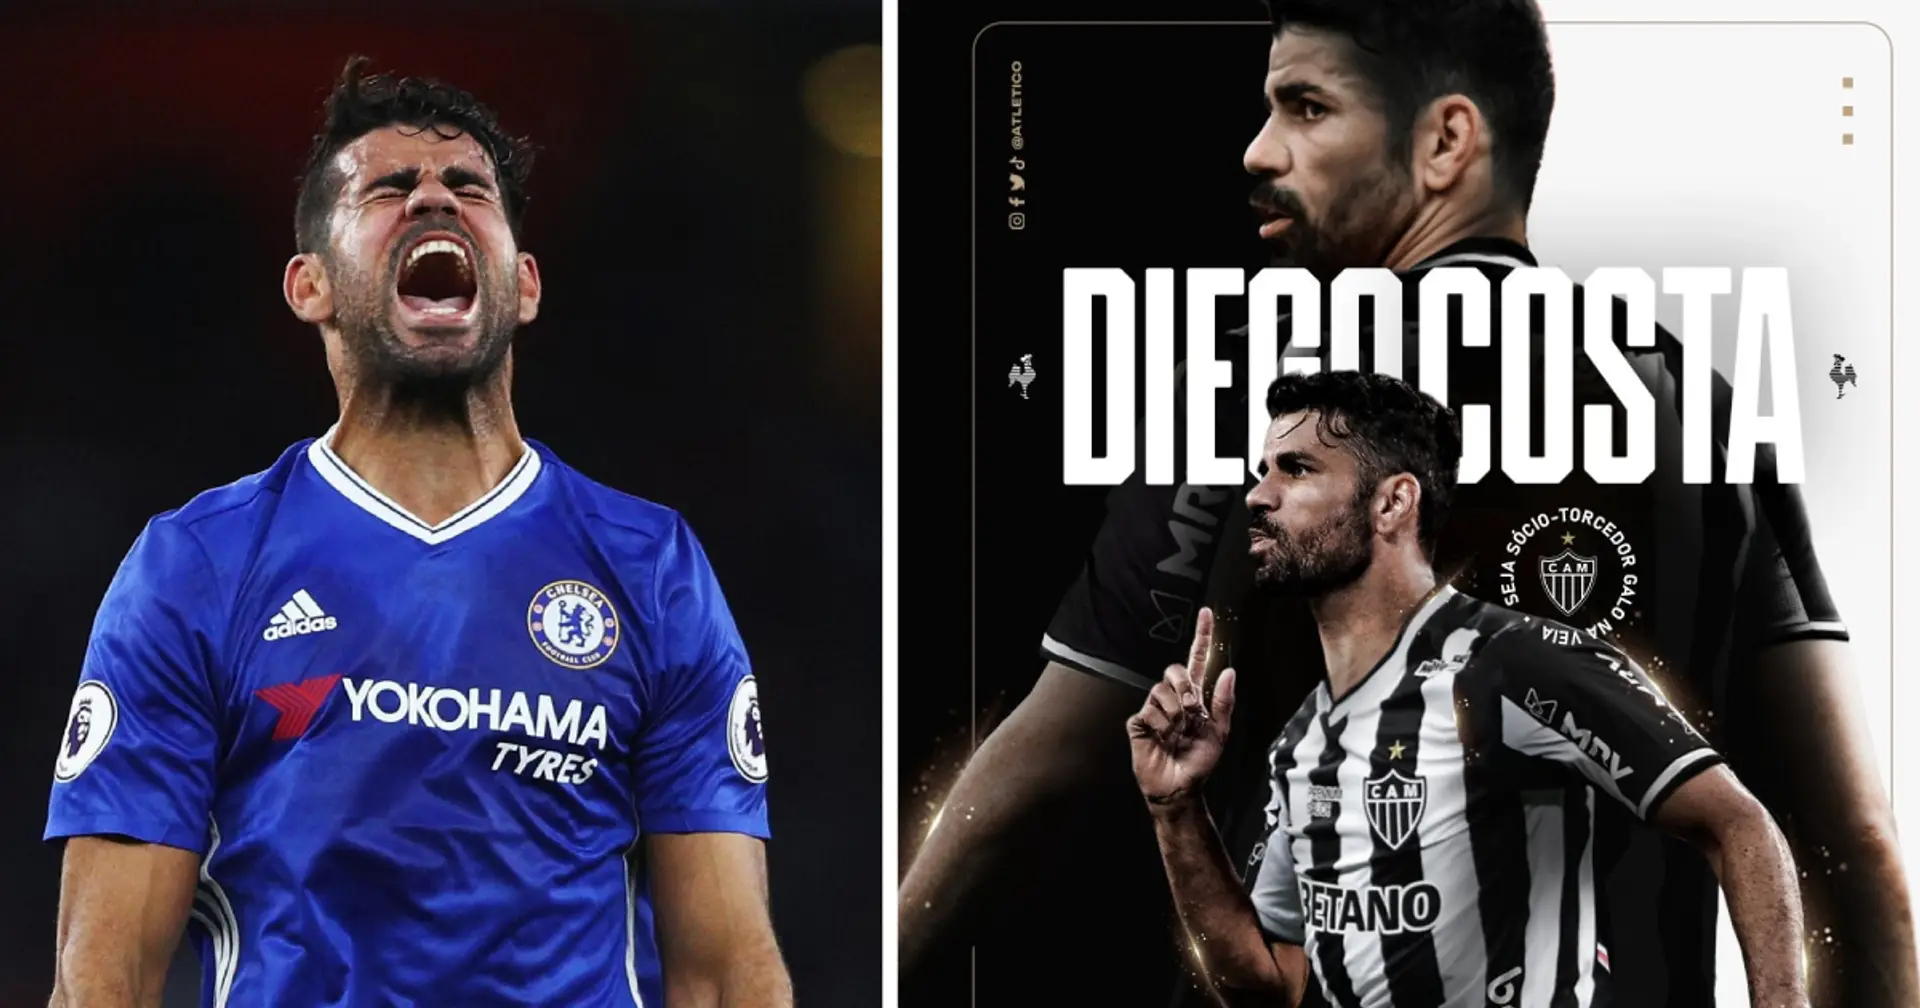 'If my mother were on the pitch and I had to beat her to win, I would': Ex-Blue Diego Costa's classic interview after joining new club